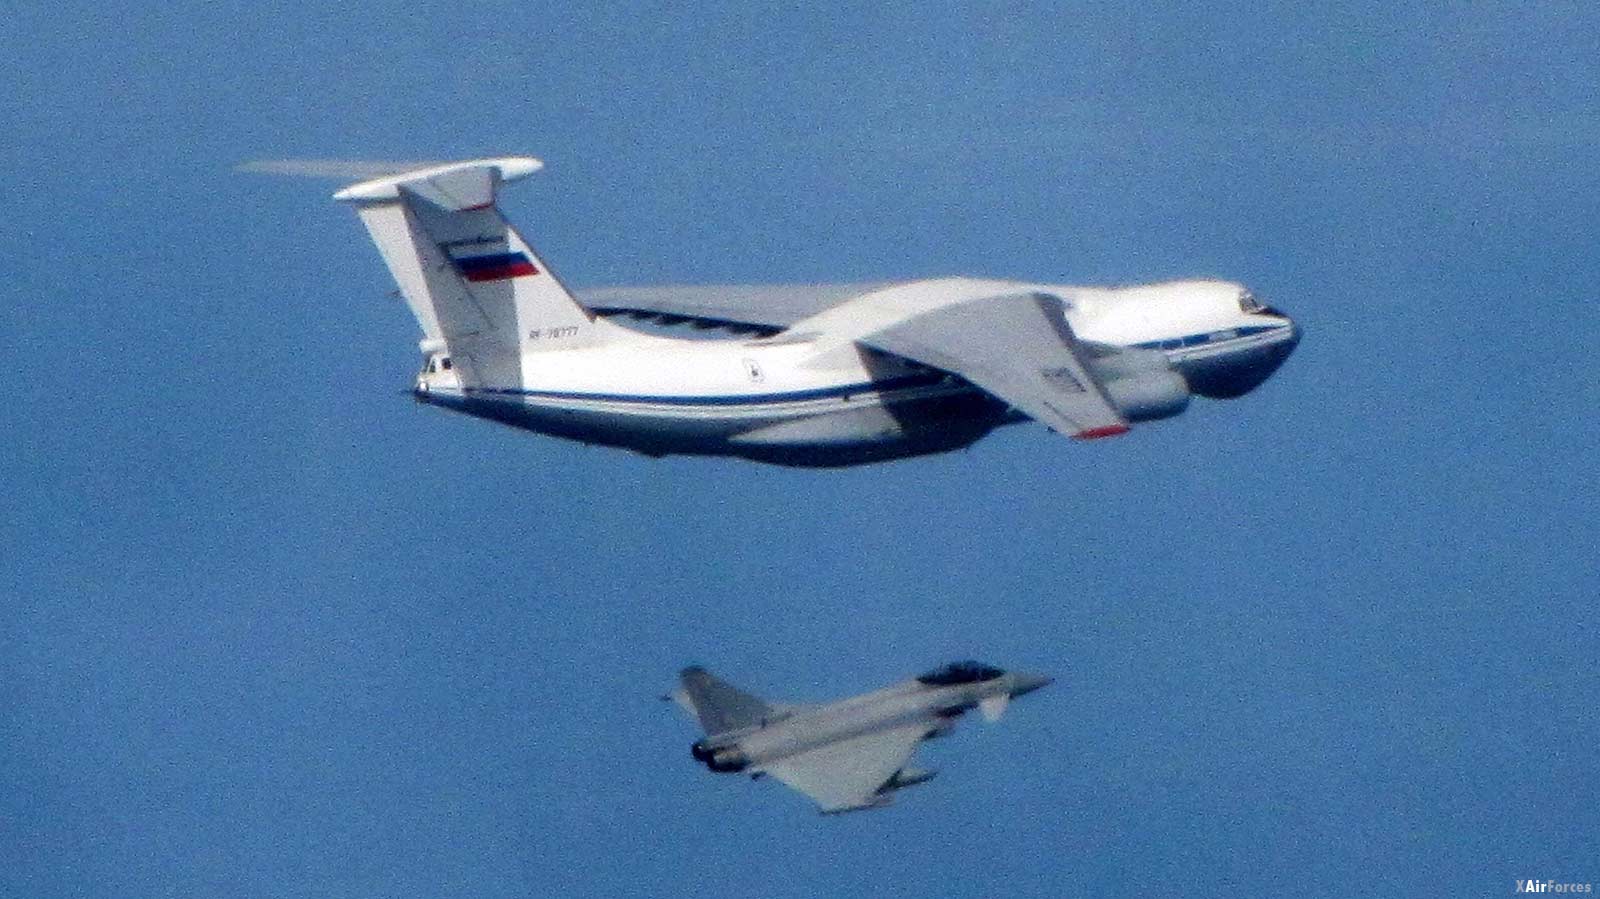 Russian IL76 Candid being intercepted by an RAF Typhoon